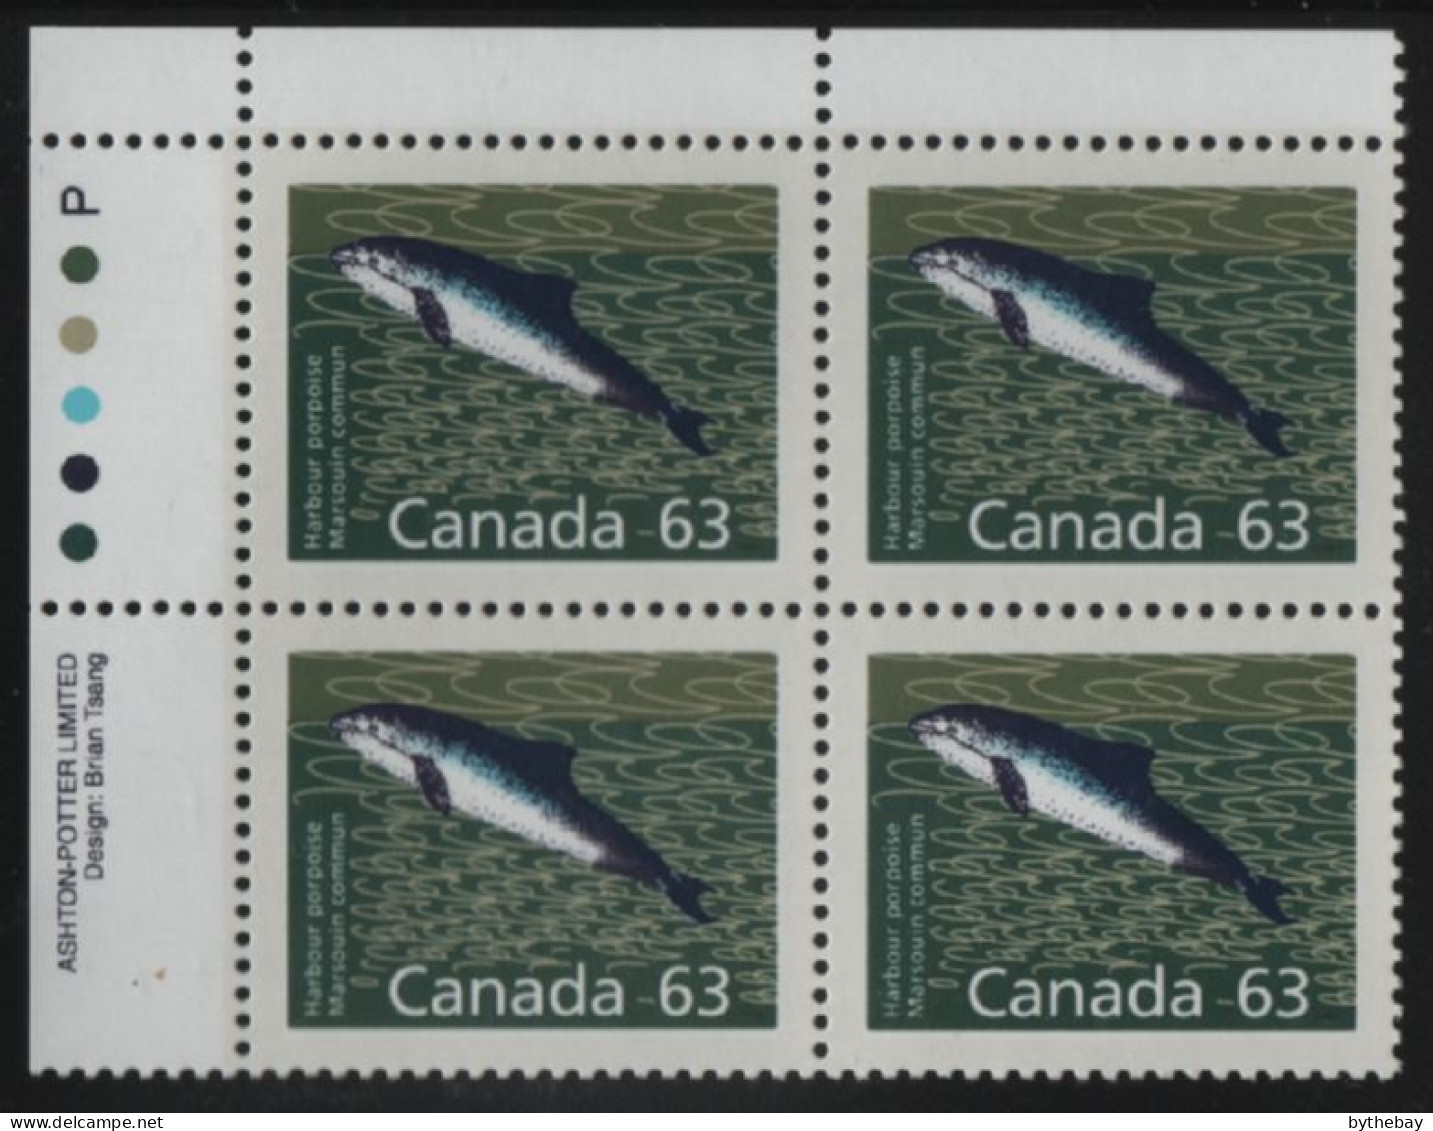 Canada 1988-92 MNH Sc 1176a 63c Harbour Porpoise UL Plate Block - Plate Number & Inscriptions